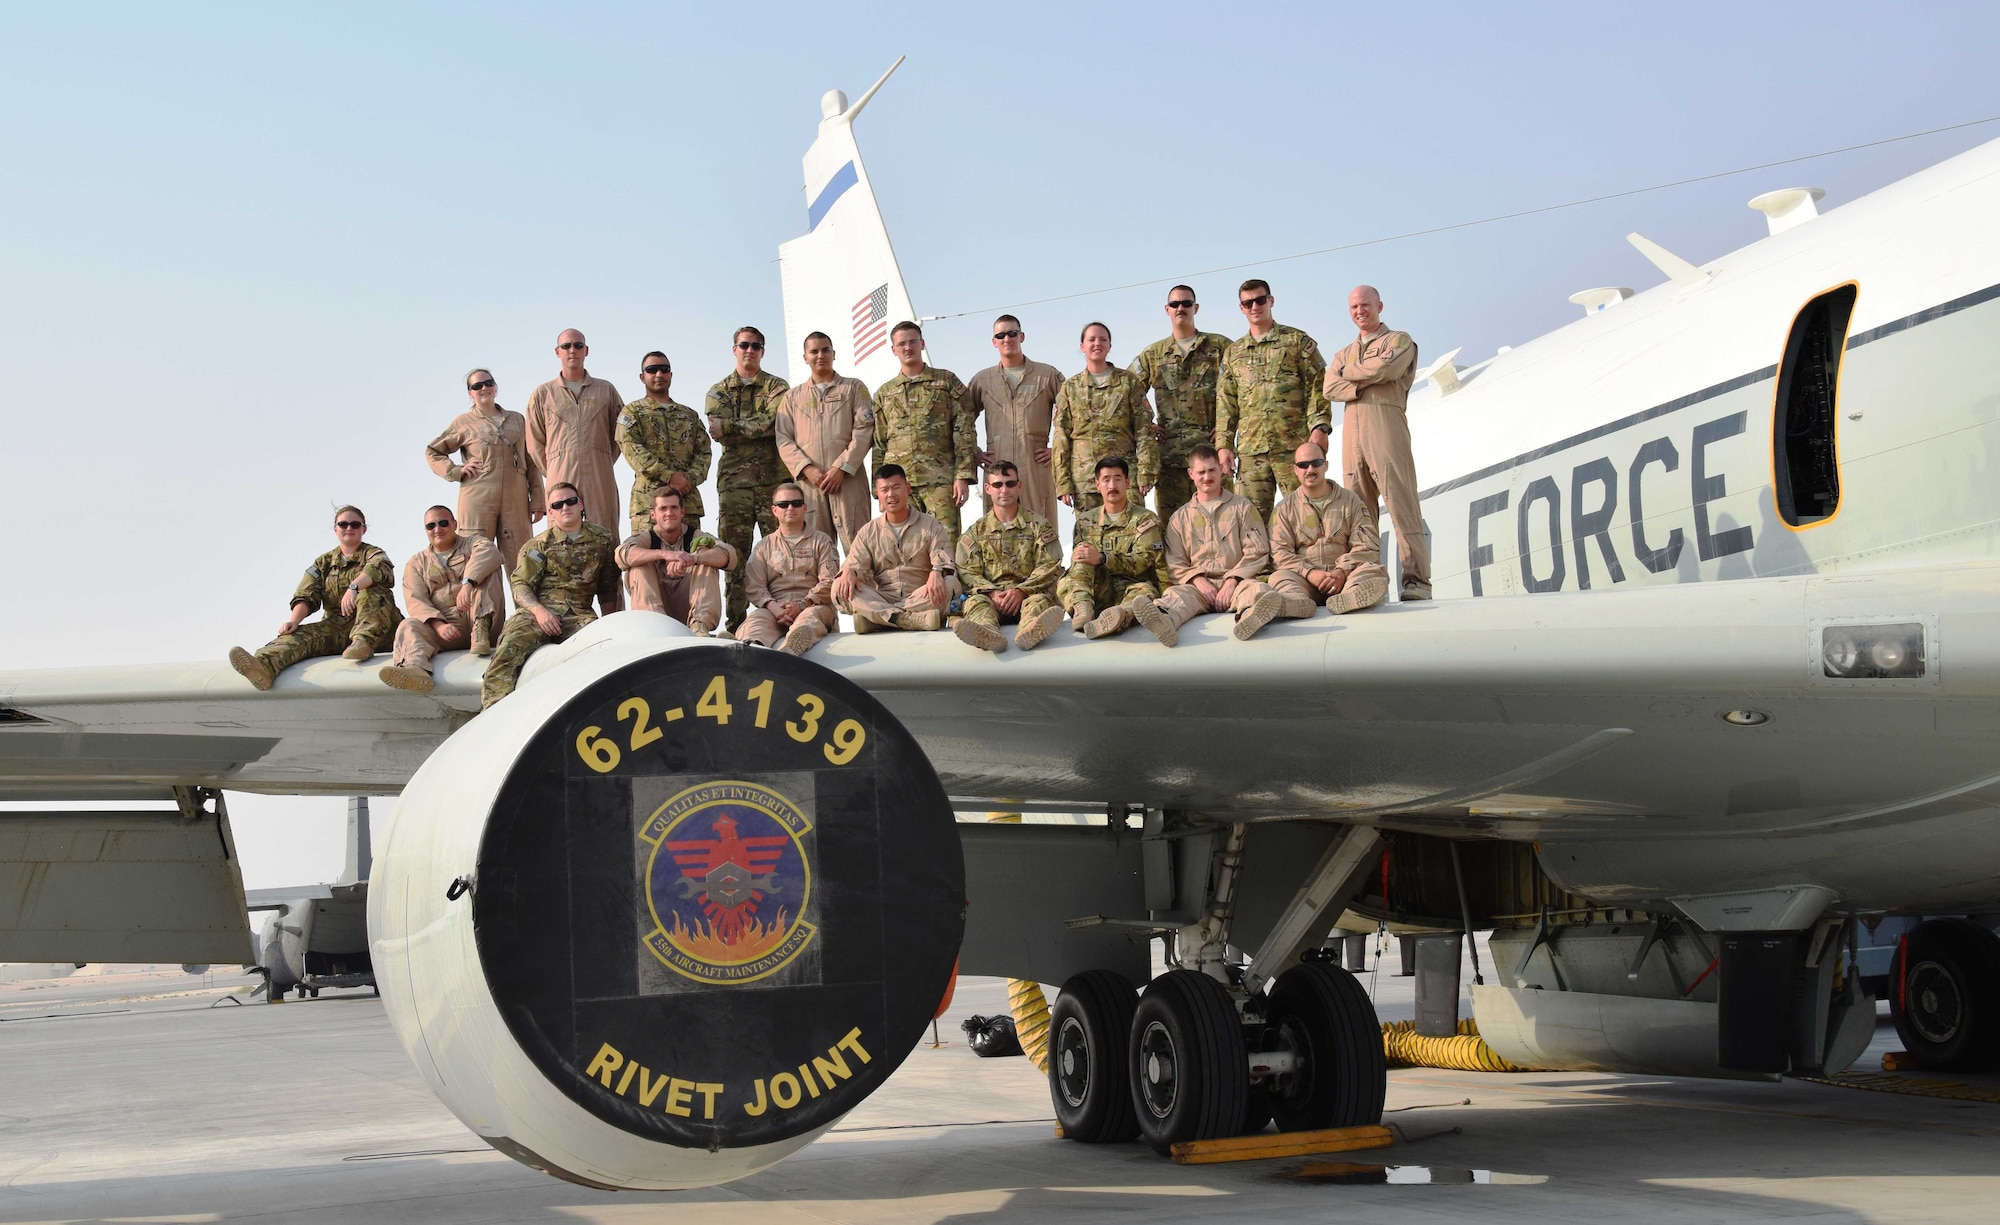 Capt. Shawn Jensen(bottom row third from right), a E-8C Joint Surveillance Target Attack Radar System pilot with the 763rd Expeditionary Reconnaisance Squadron, and his crew posed for a portrait on the wing of their aircraft at Al Udeid Air Base, Qatar, after teturning from a mission in the area of responsibility Sept. 11, 2016. The JSTARS gathers intelligence during its missions in the aor, which contrasts with his grandfather's B-17 Flying Fortress bombing missions for the 379th Bombardmnet Group over Europe in World War II.(U. S. Air Force photo/Tech. Sgt. Carlos J. Trevino/Released)